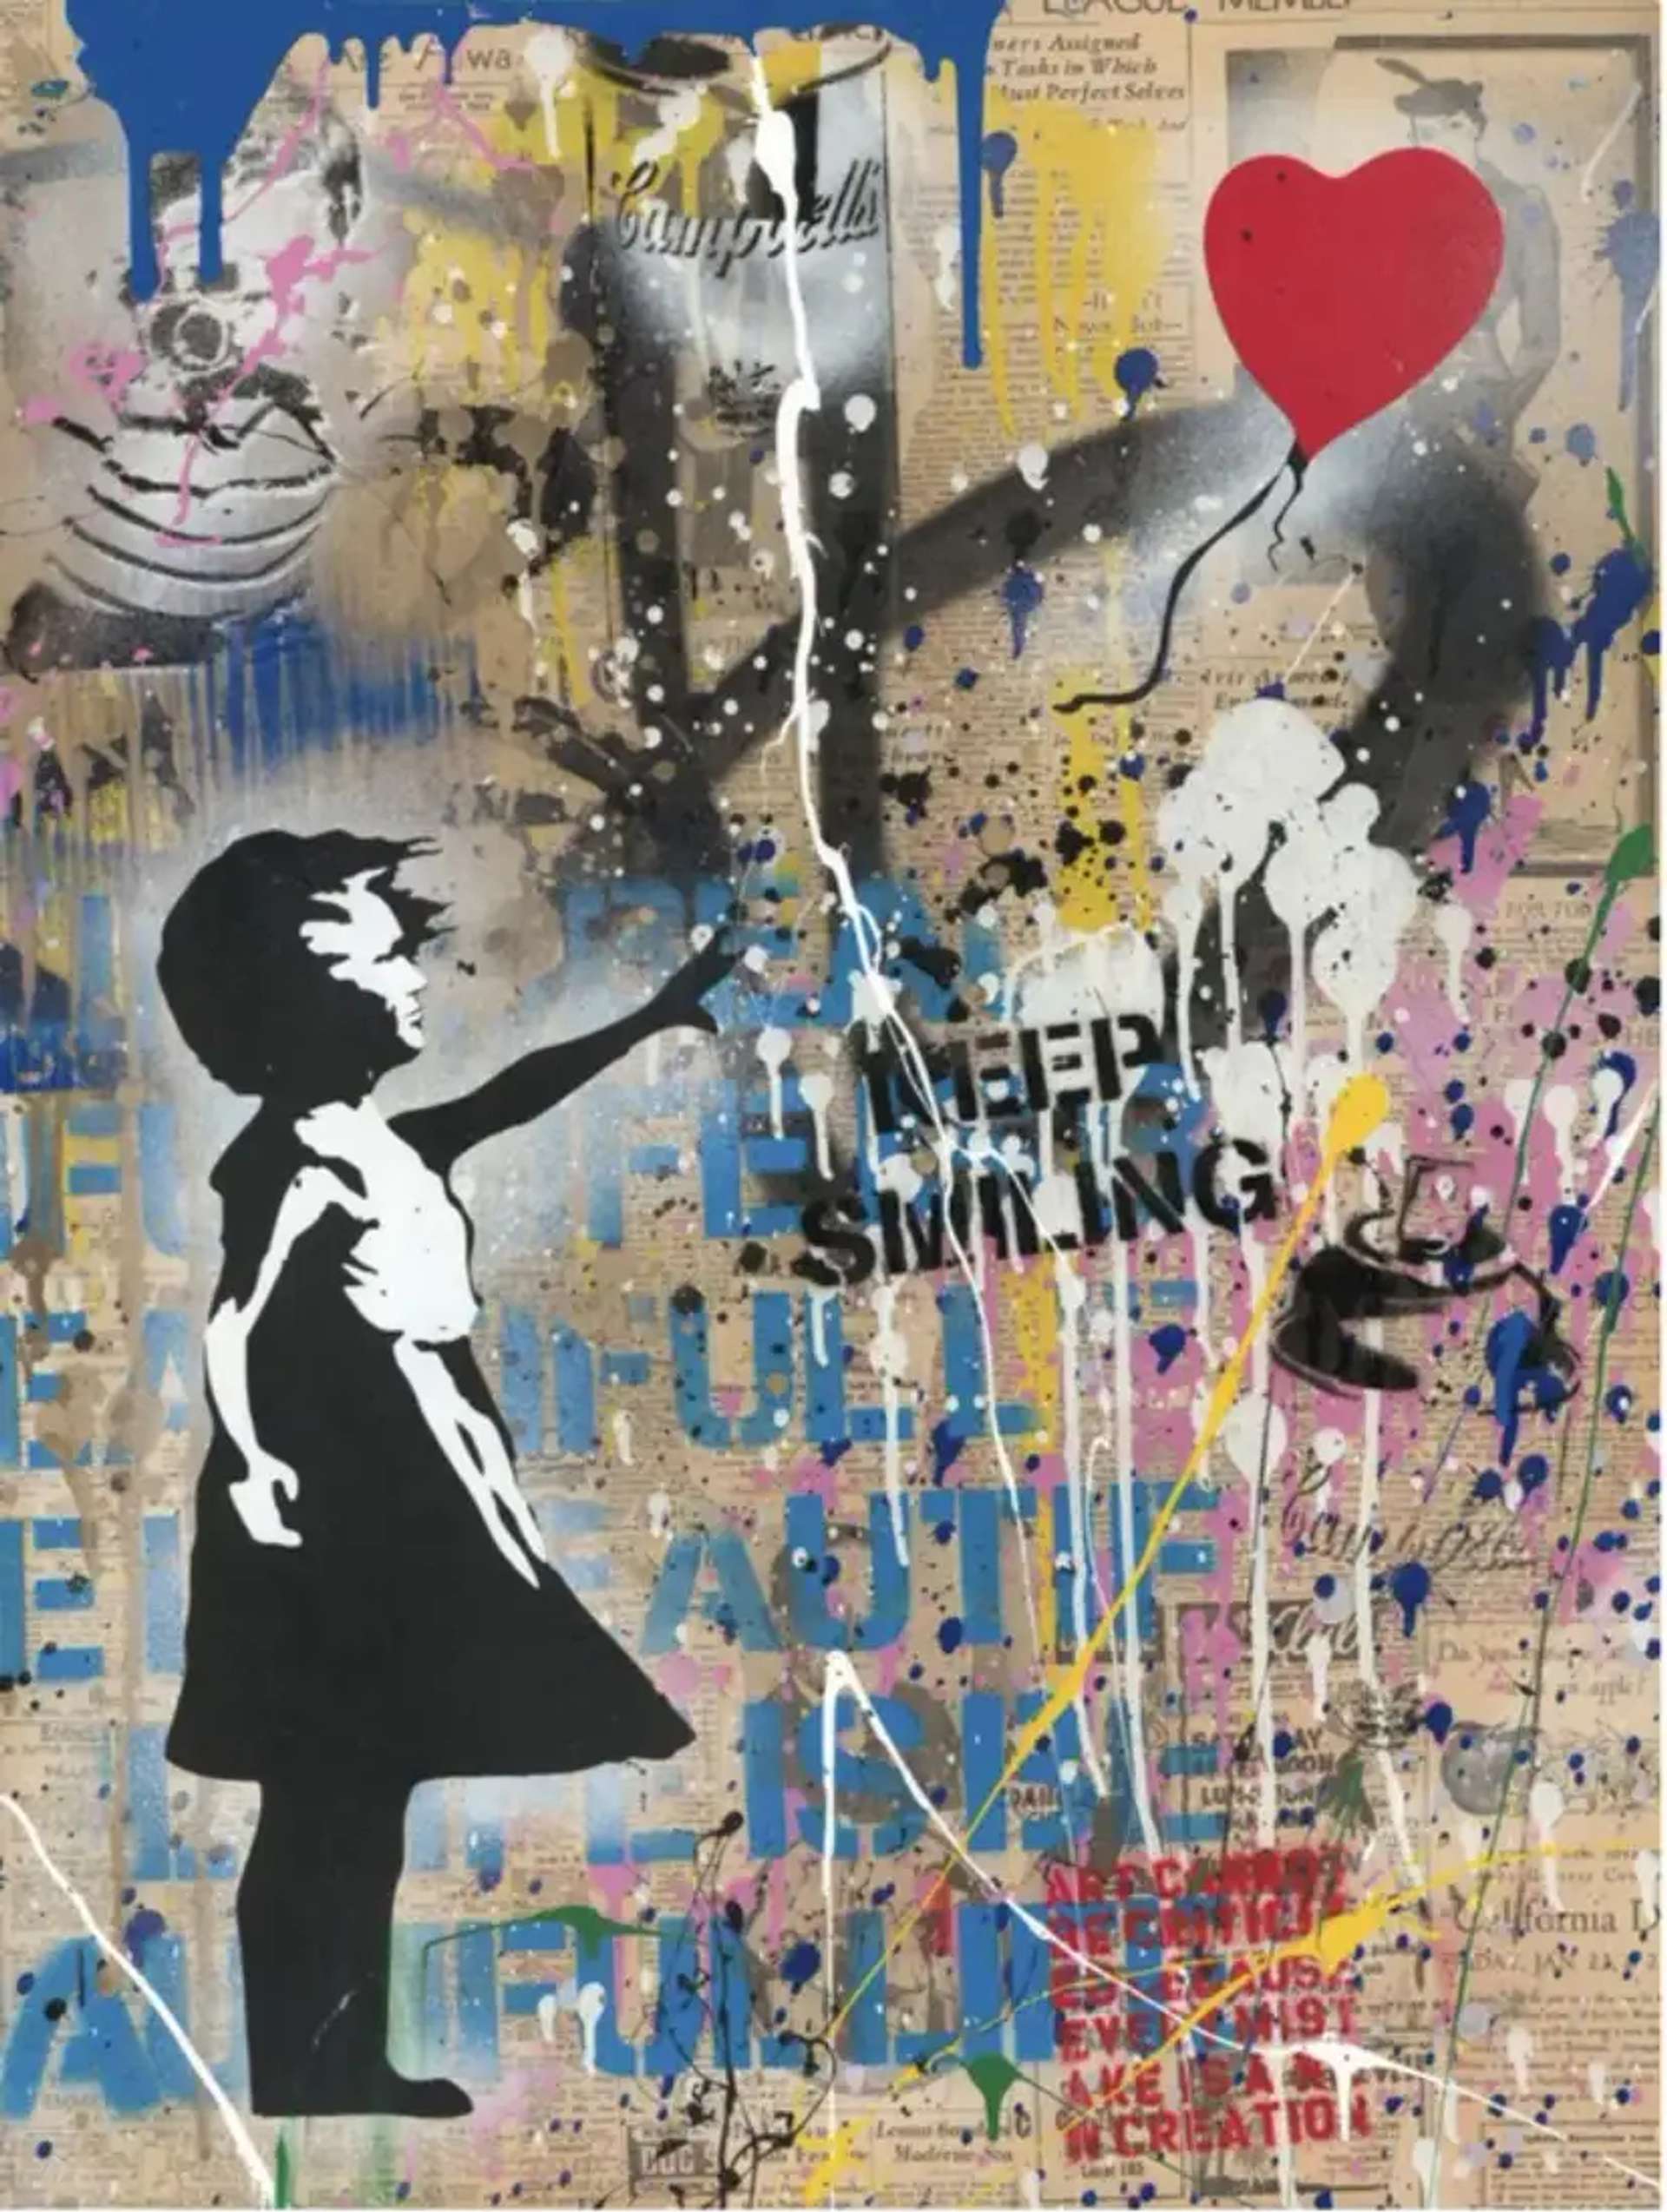 A stencil artwork by Mr. Brainwash featuring an appropriated image from street artist Banksy. The artwork depicts a young girl in a dress releasing a red heart-shaped balloon. The stencil is displayed on a vibrant graffiti-covered canvas alongside other stenciled artworks.